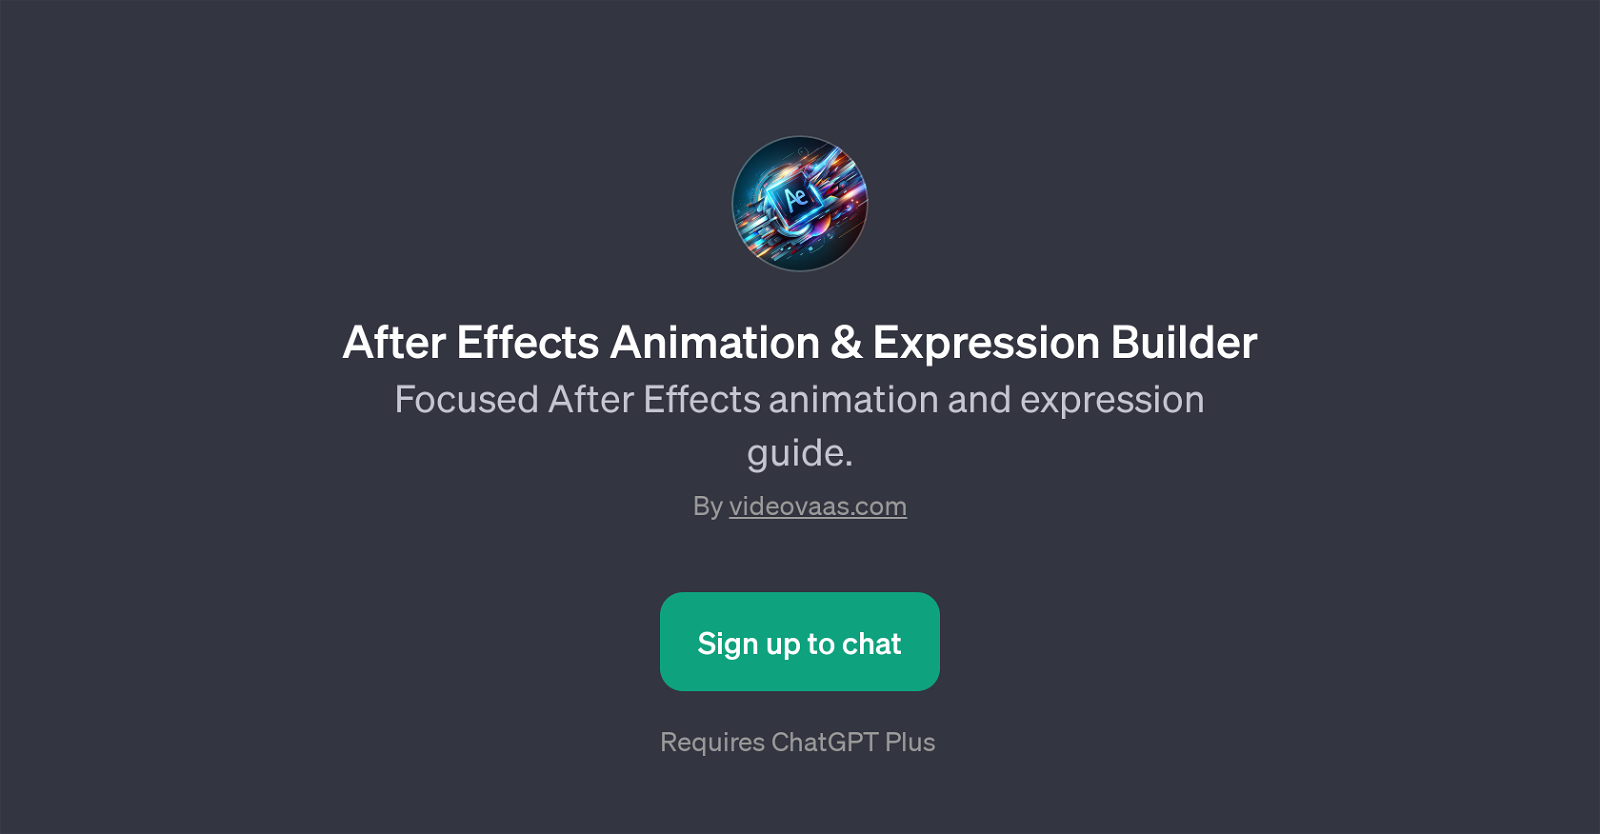 After Effects Animation & Expression Builder website